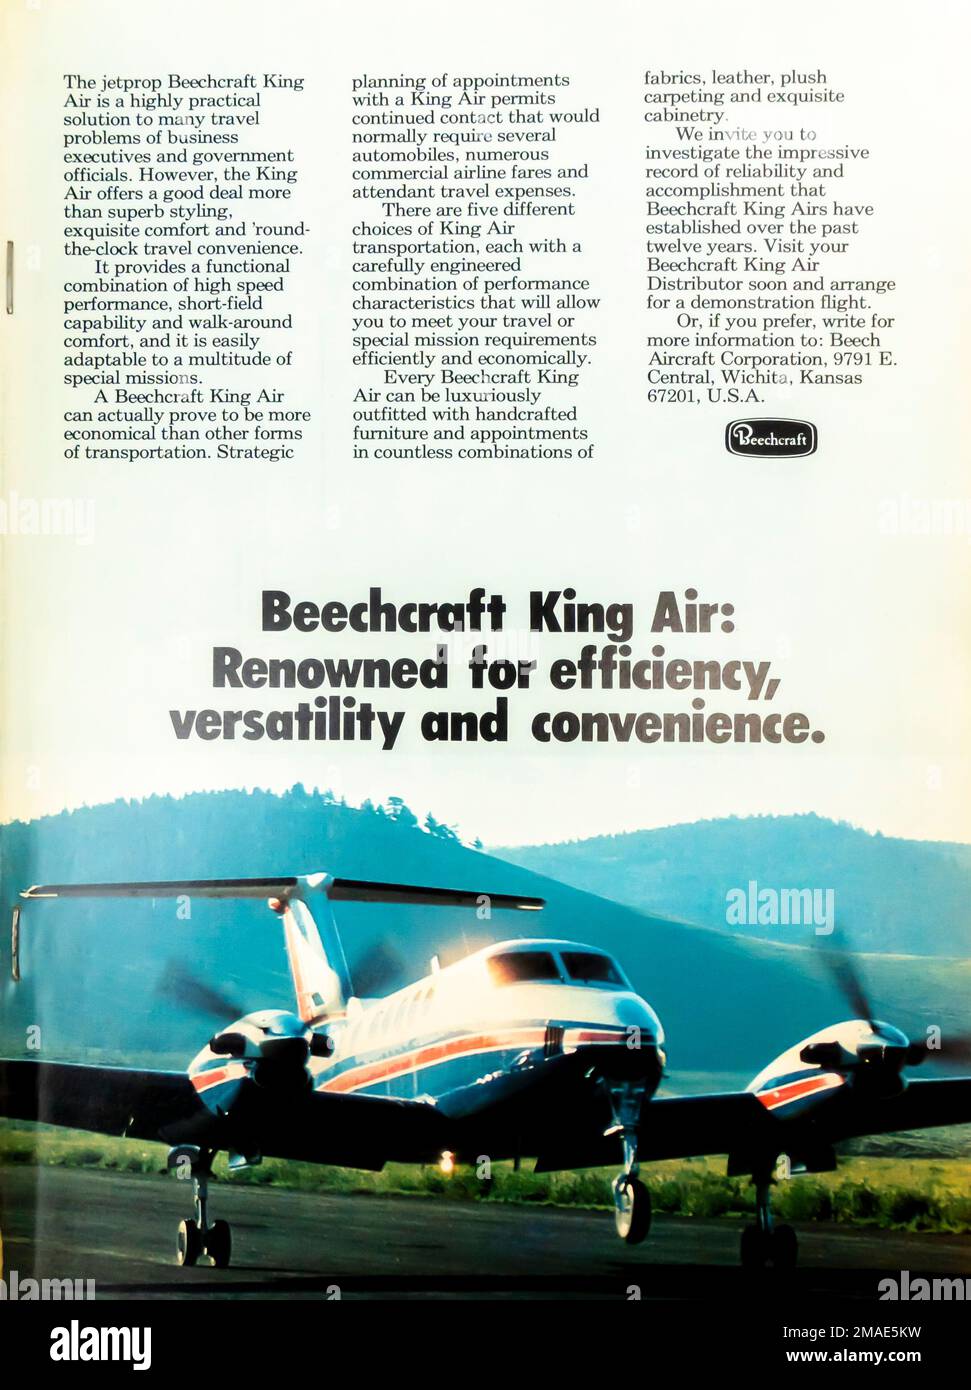 Beechcraft King Air private jet, executive jets advertisement placed inside NatGeo magazine,  April 1976 Stock Photo